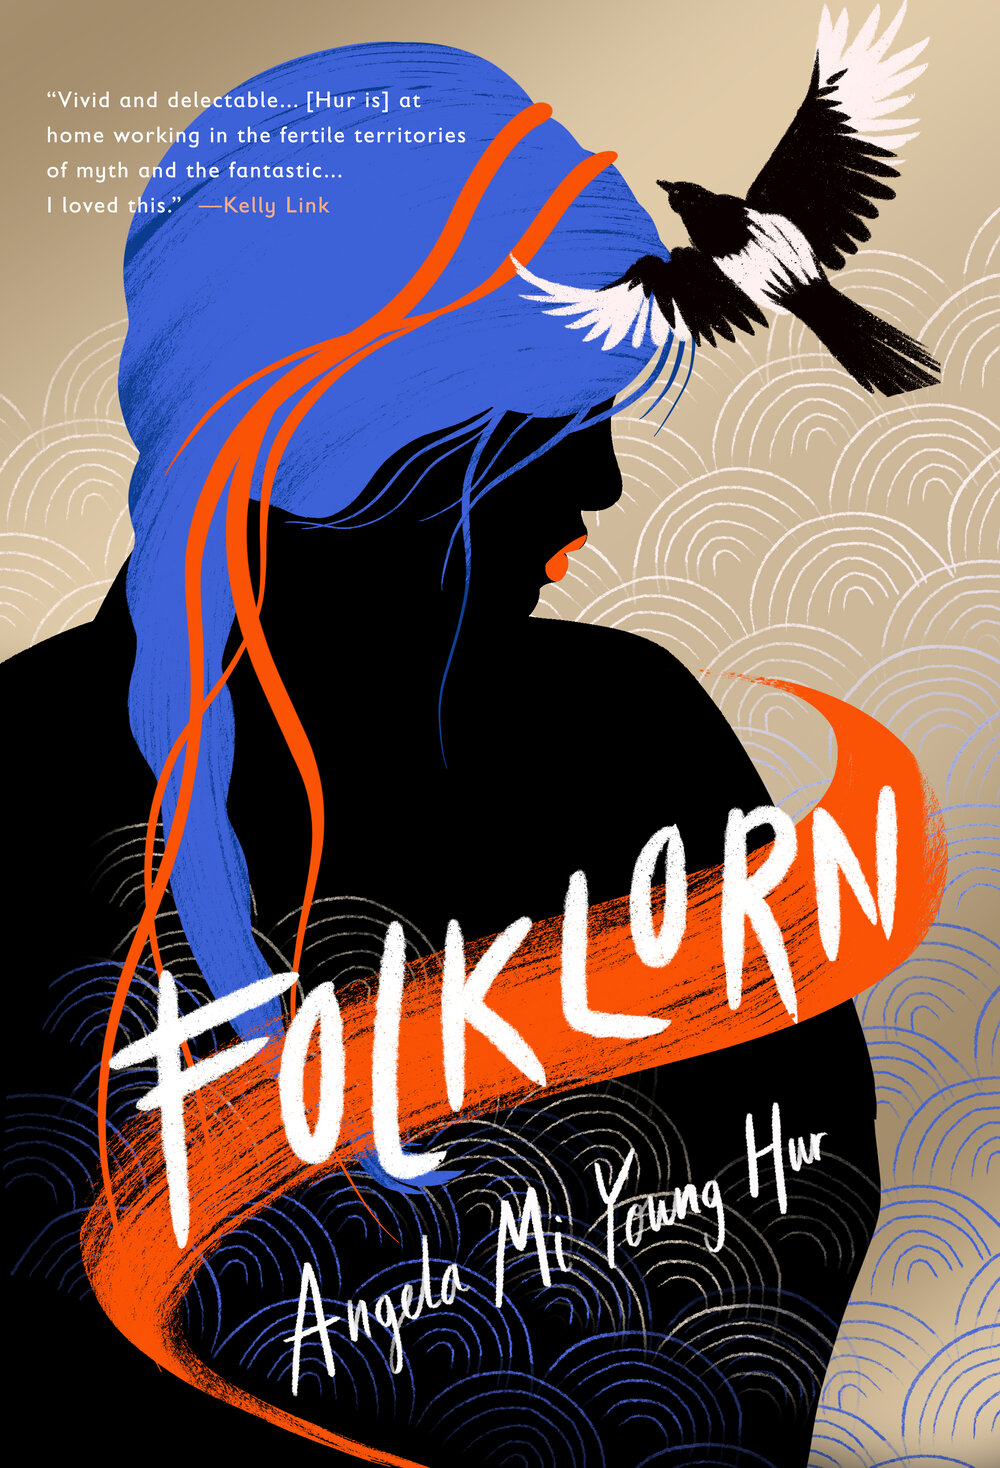 The front cover of the book titled Folklorn published by Erewhon Press